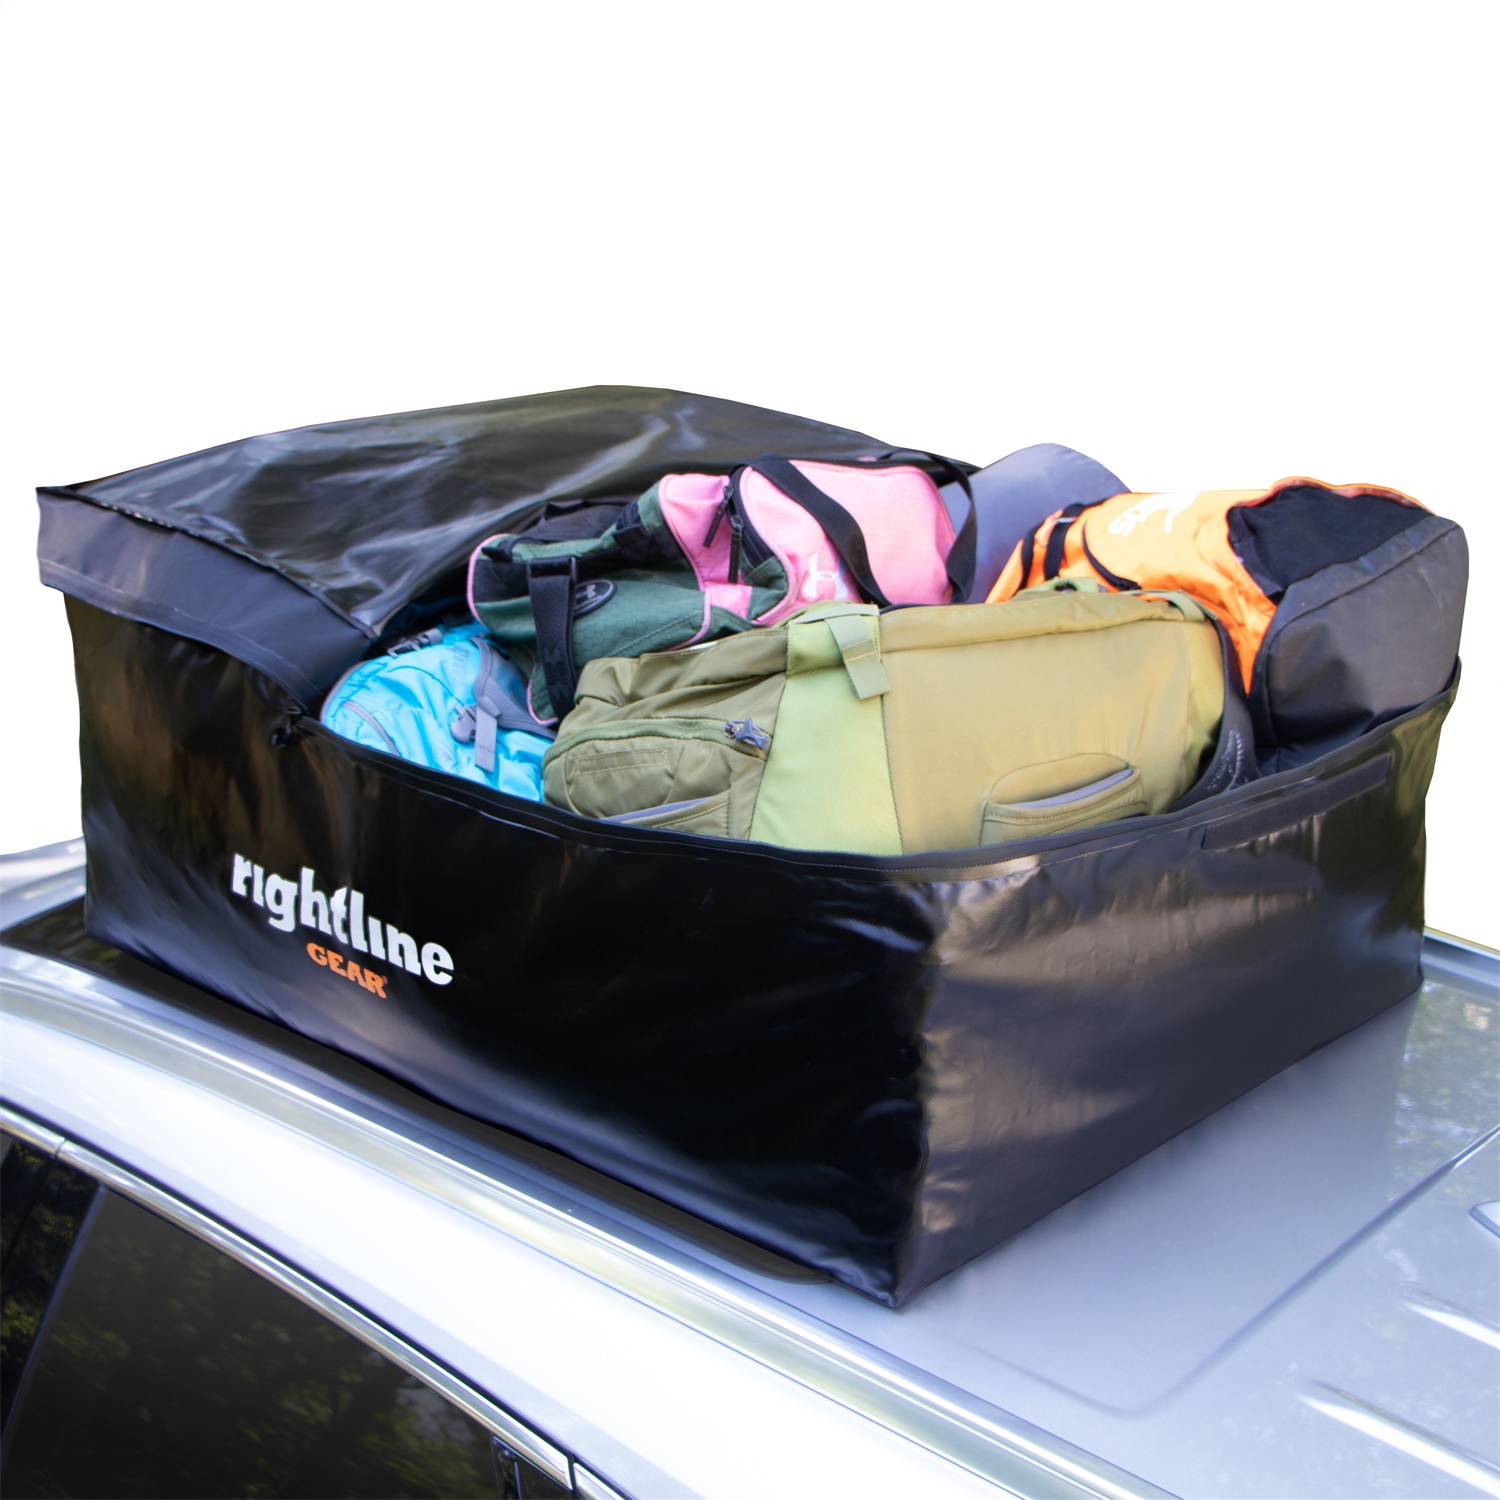 Rightline Gear Sport 2 Car Top Carrier, 100S20 Fits select: 1997-2019 HONDA CR-V, 2001-2019 FORD ESCAPE - image 4 of 6